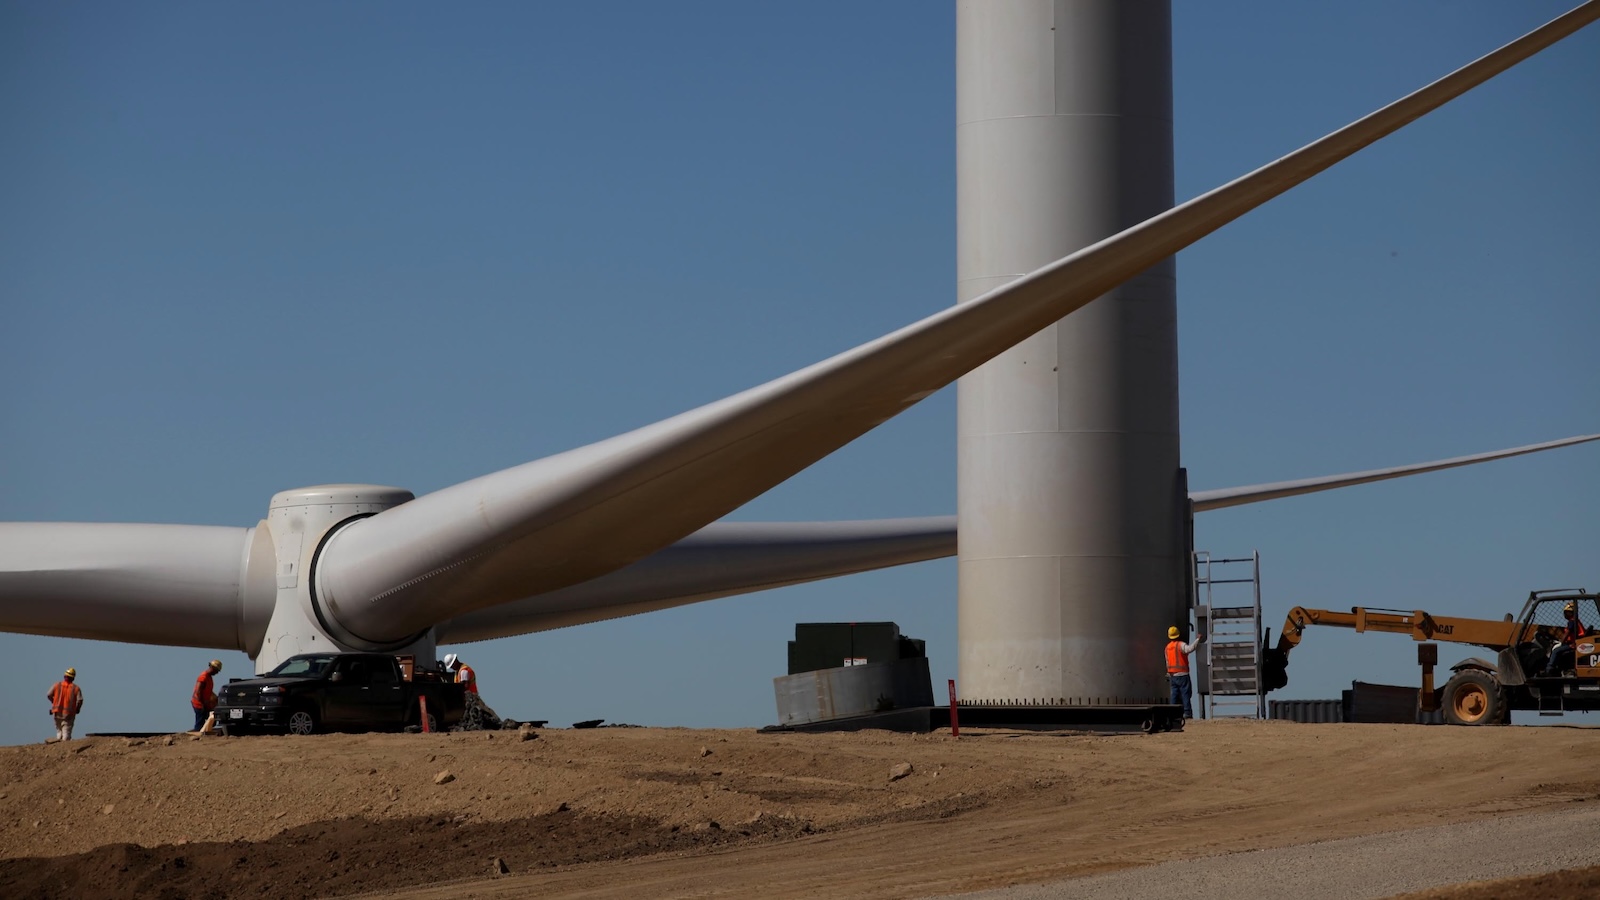 Crews on a ridgeline prepare to install a huge rotor on a wind turbine on Altamont Pass in the San Francisco Bay Area.